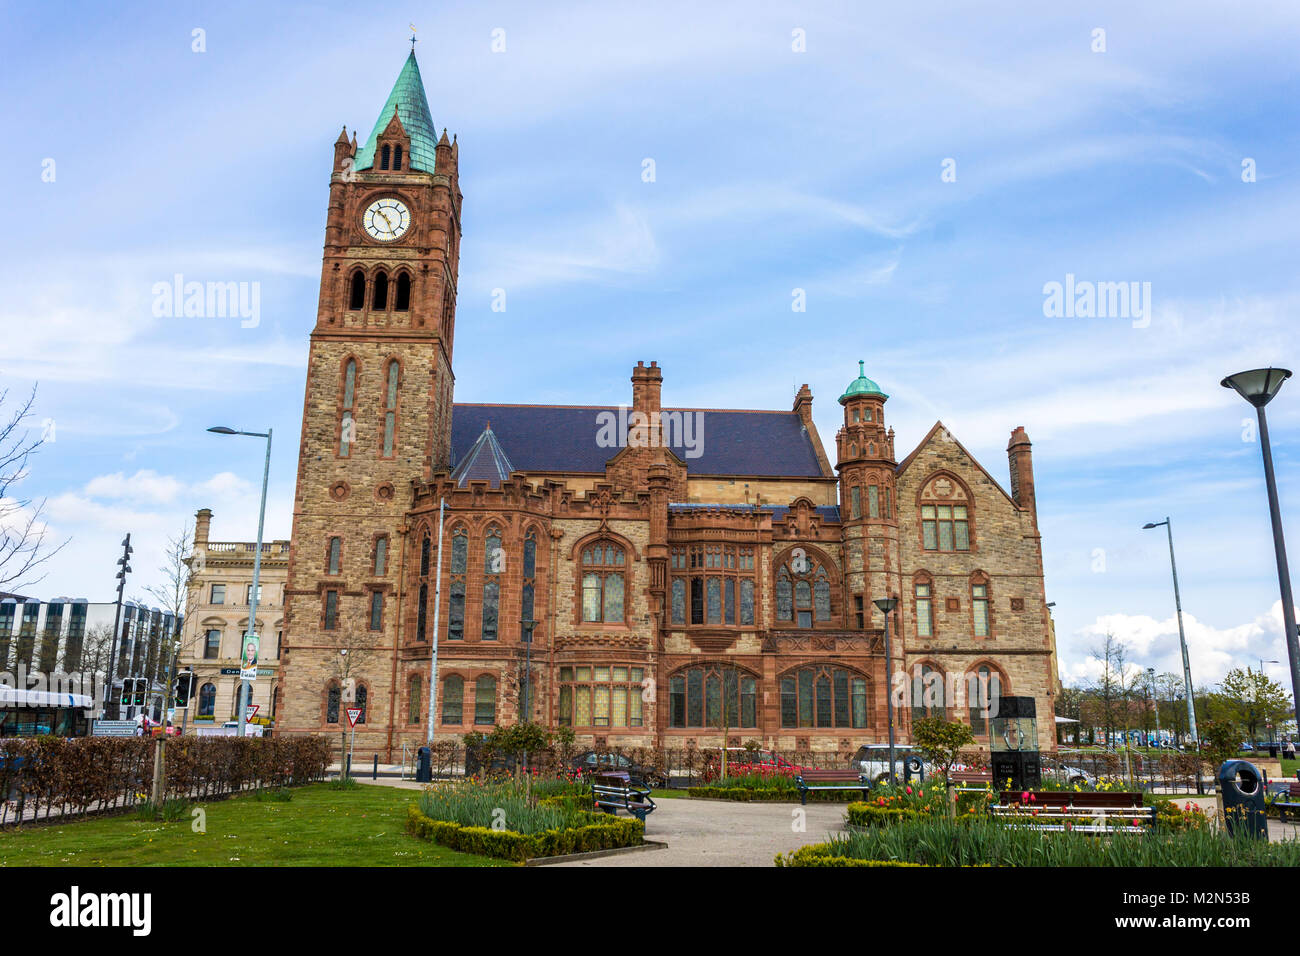 The Guildhall, a building built in 1890 in which the elected members of Derry and Strabane District Council meet. Derry, County Londonderry, Northern  Stock Photo